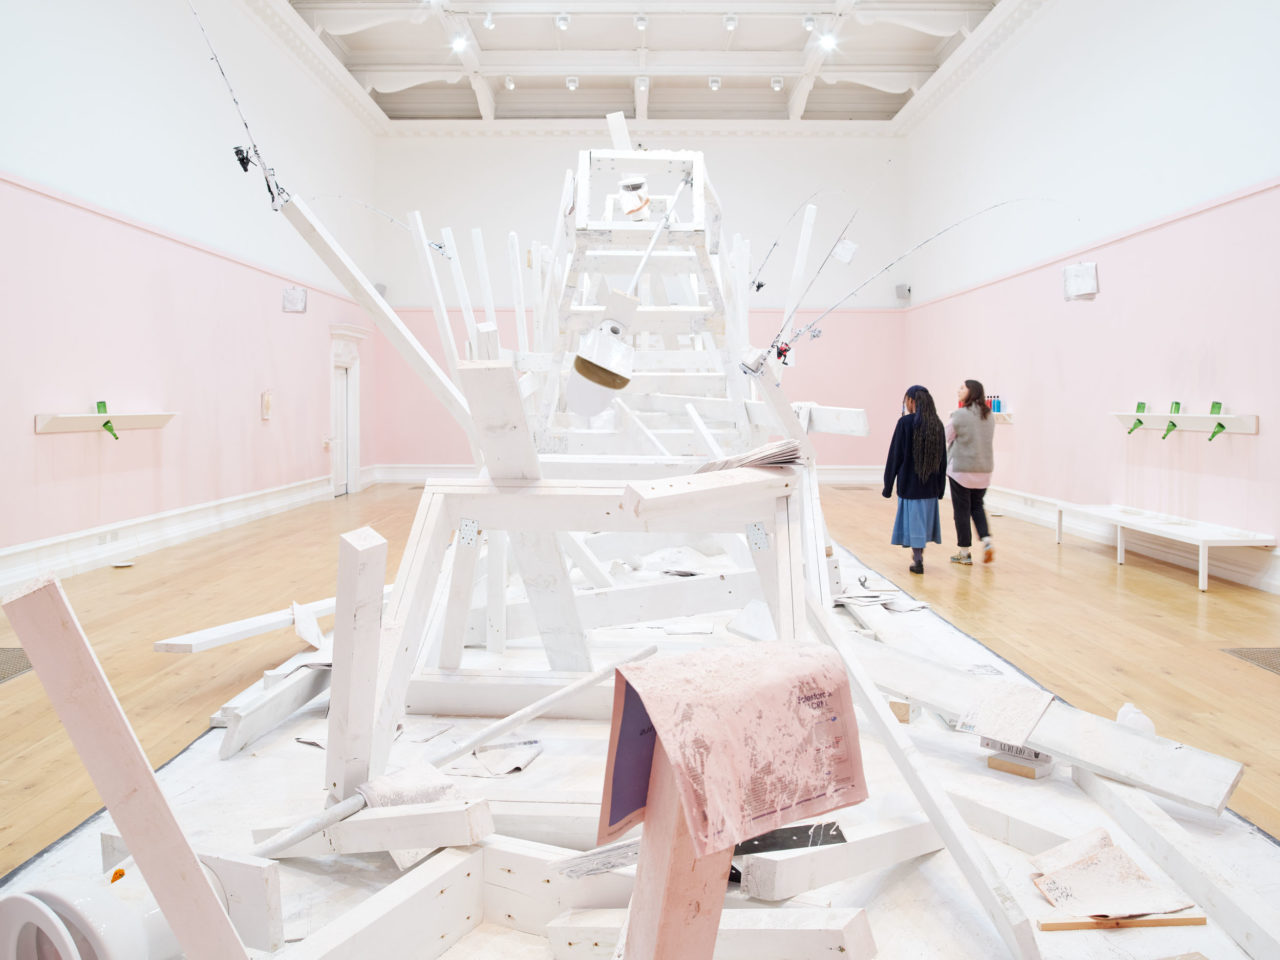 A wooden installation by artist Pope.L painted white and covered in flour in the centre of a large gallery with pink and white walls.